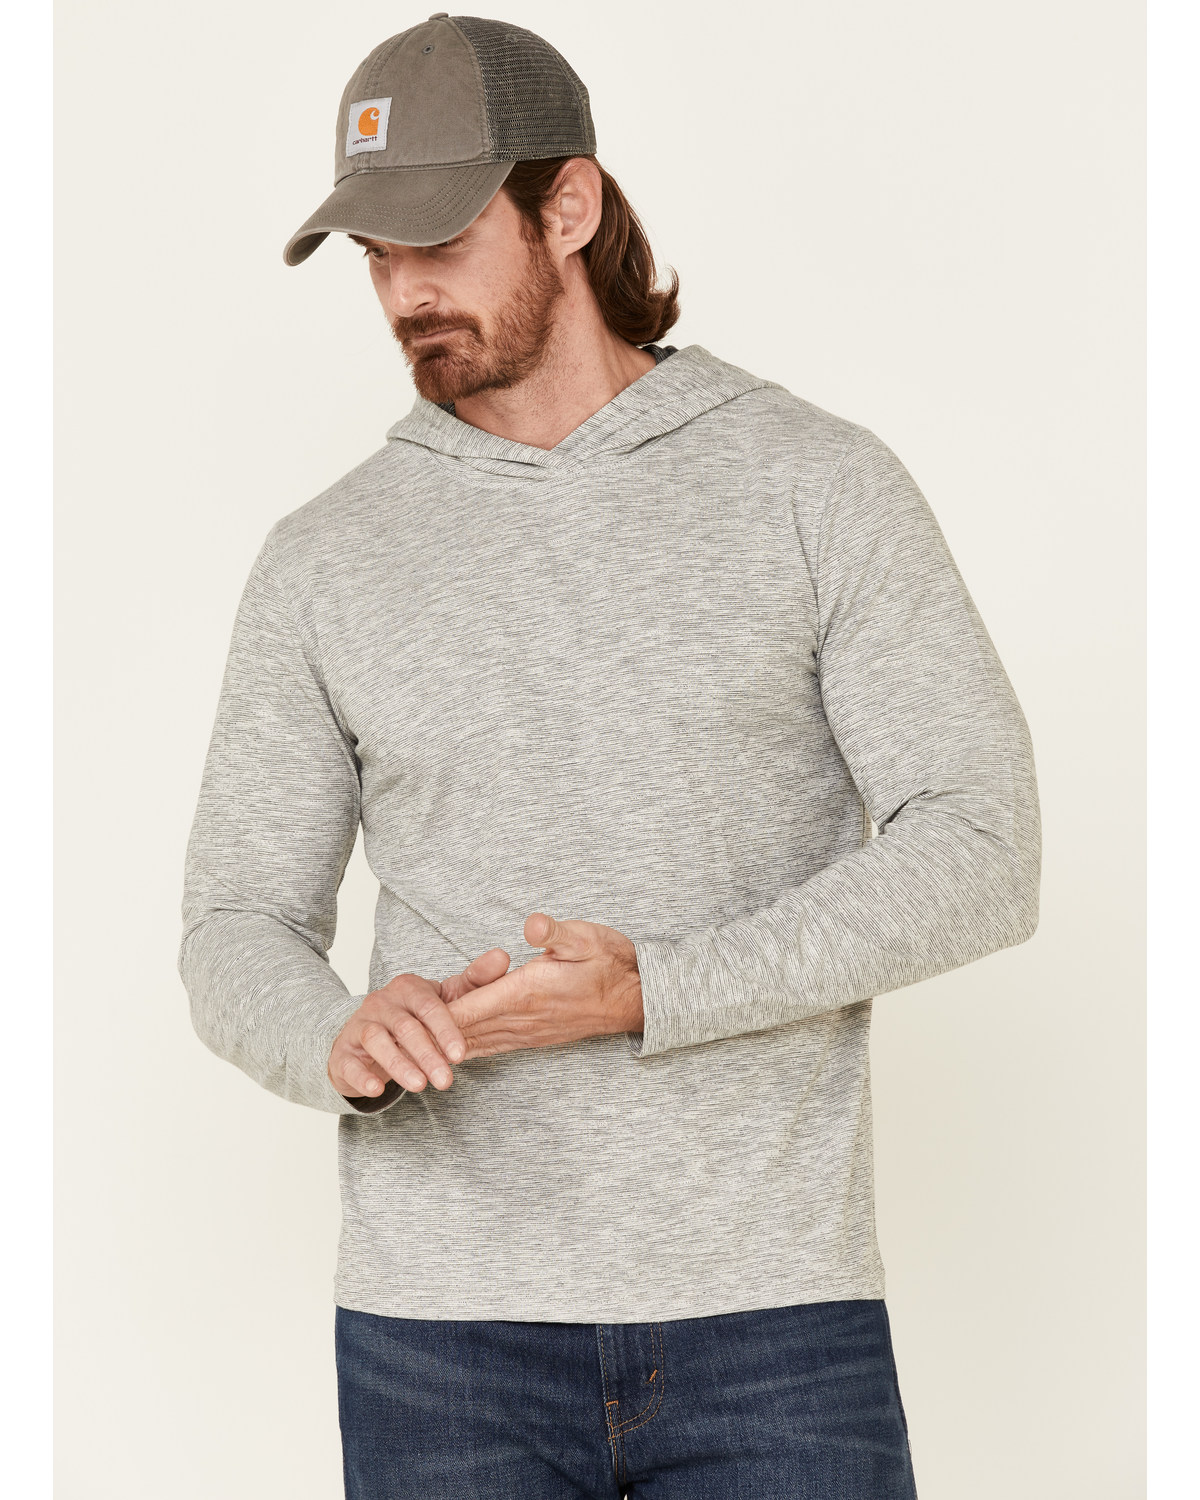 North River Men's Solid Hooded Shirt